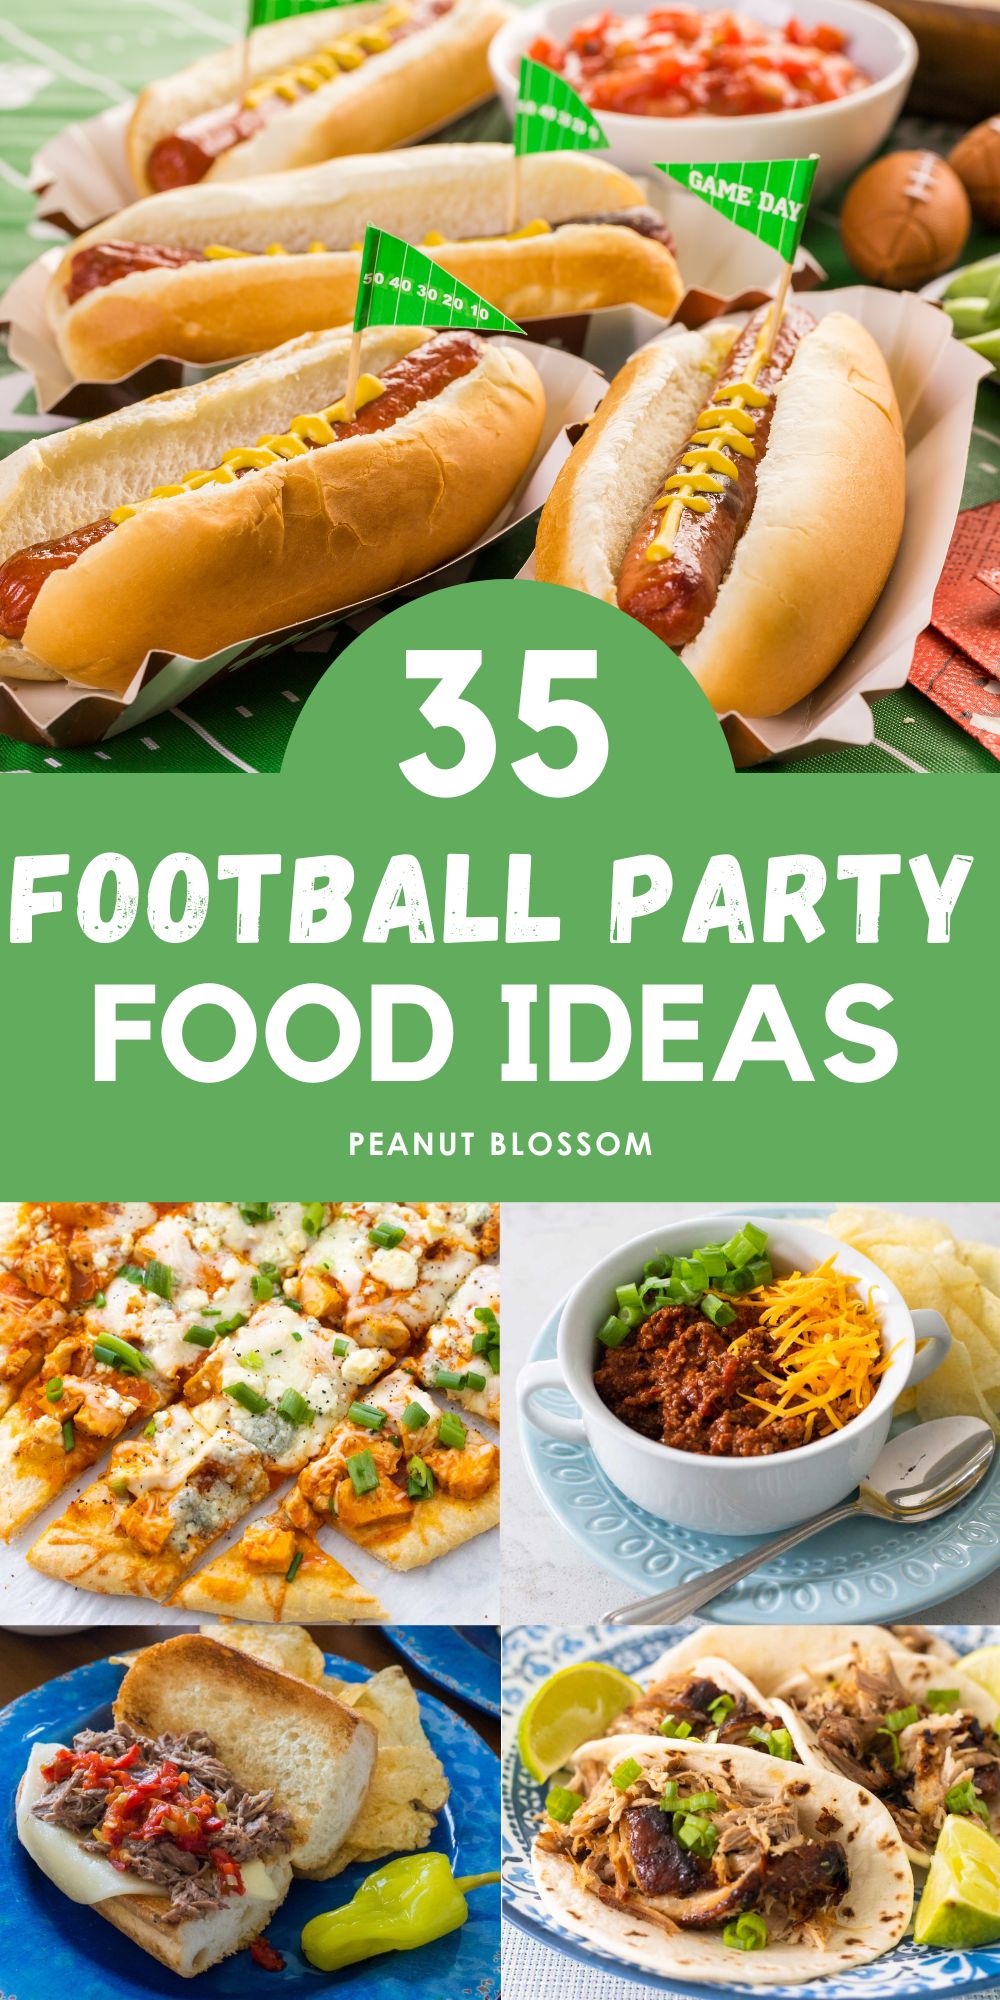 The photo collage shows a football party table filled with hot dogs decorated with pennant flags next to photos of buffalo chicken pizza, chili bowls, an Italian beef sandwich, and pork carnitas tacos.